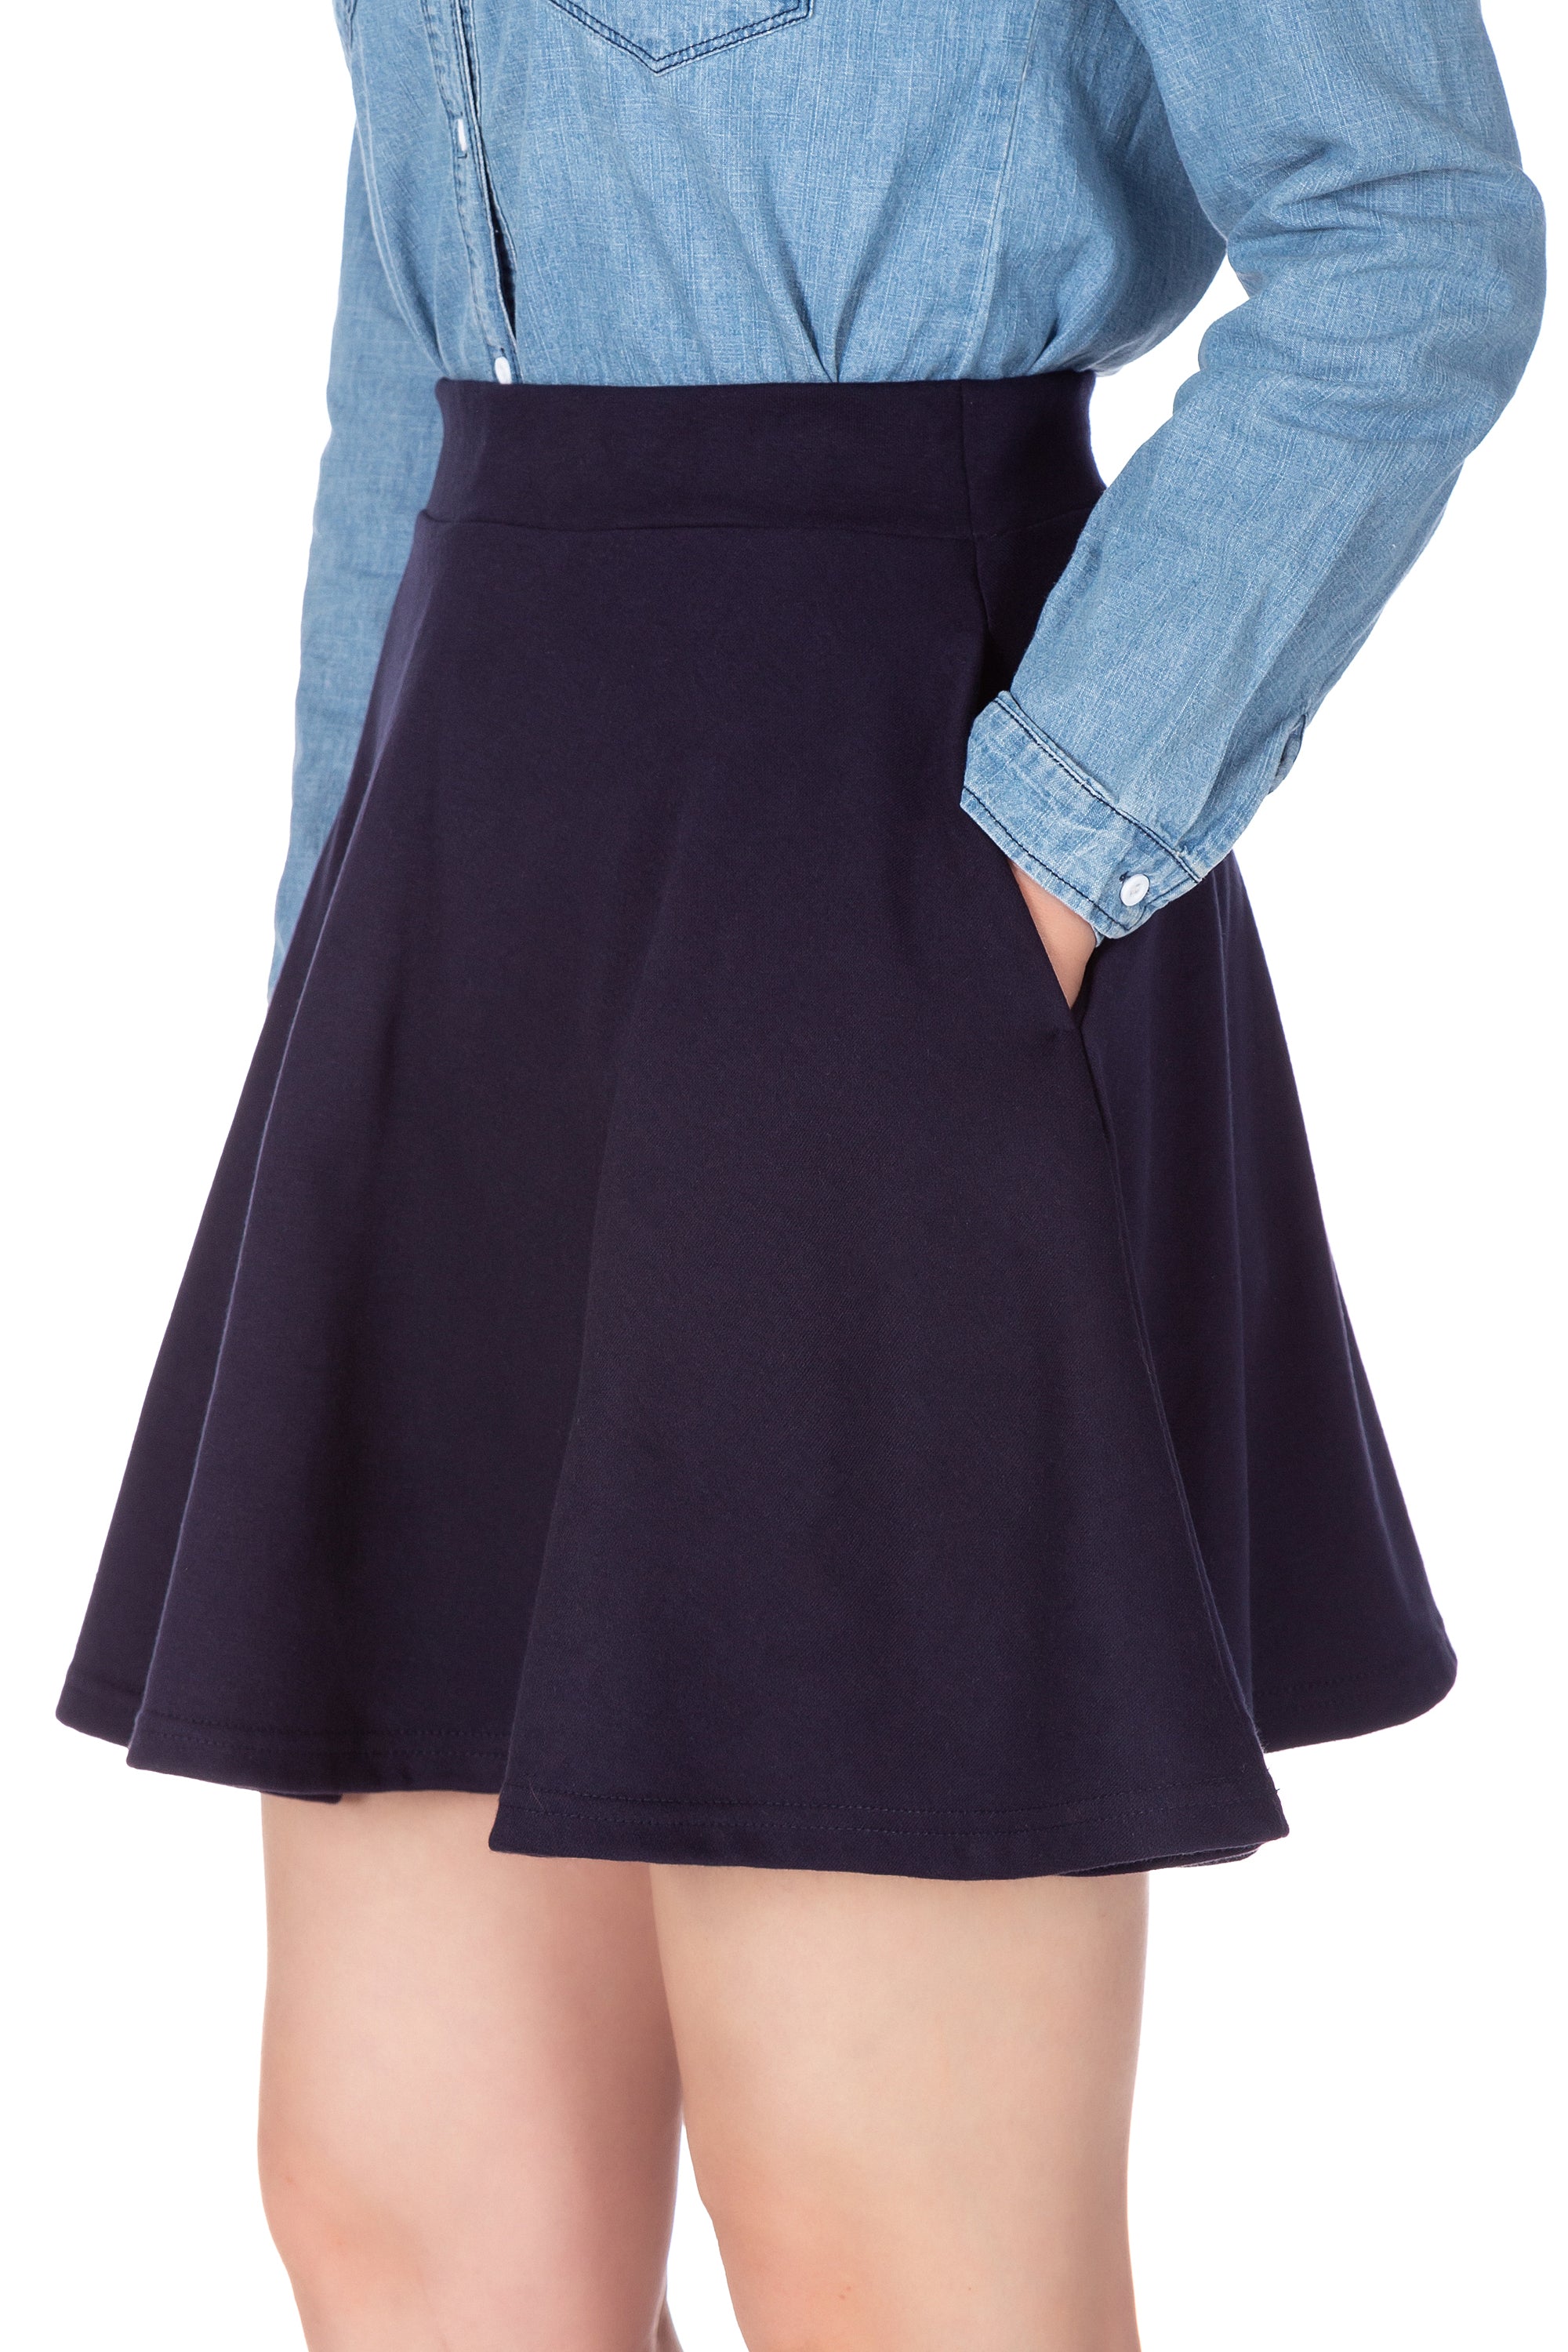 [With Pockets] Basic Solid Stretchy Cotton High Waist A-line Flared Skater Mini Skirt_Navy Blue